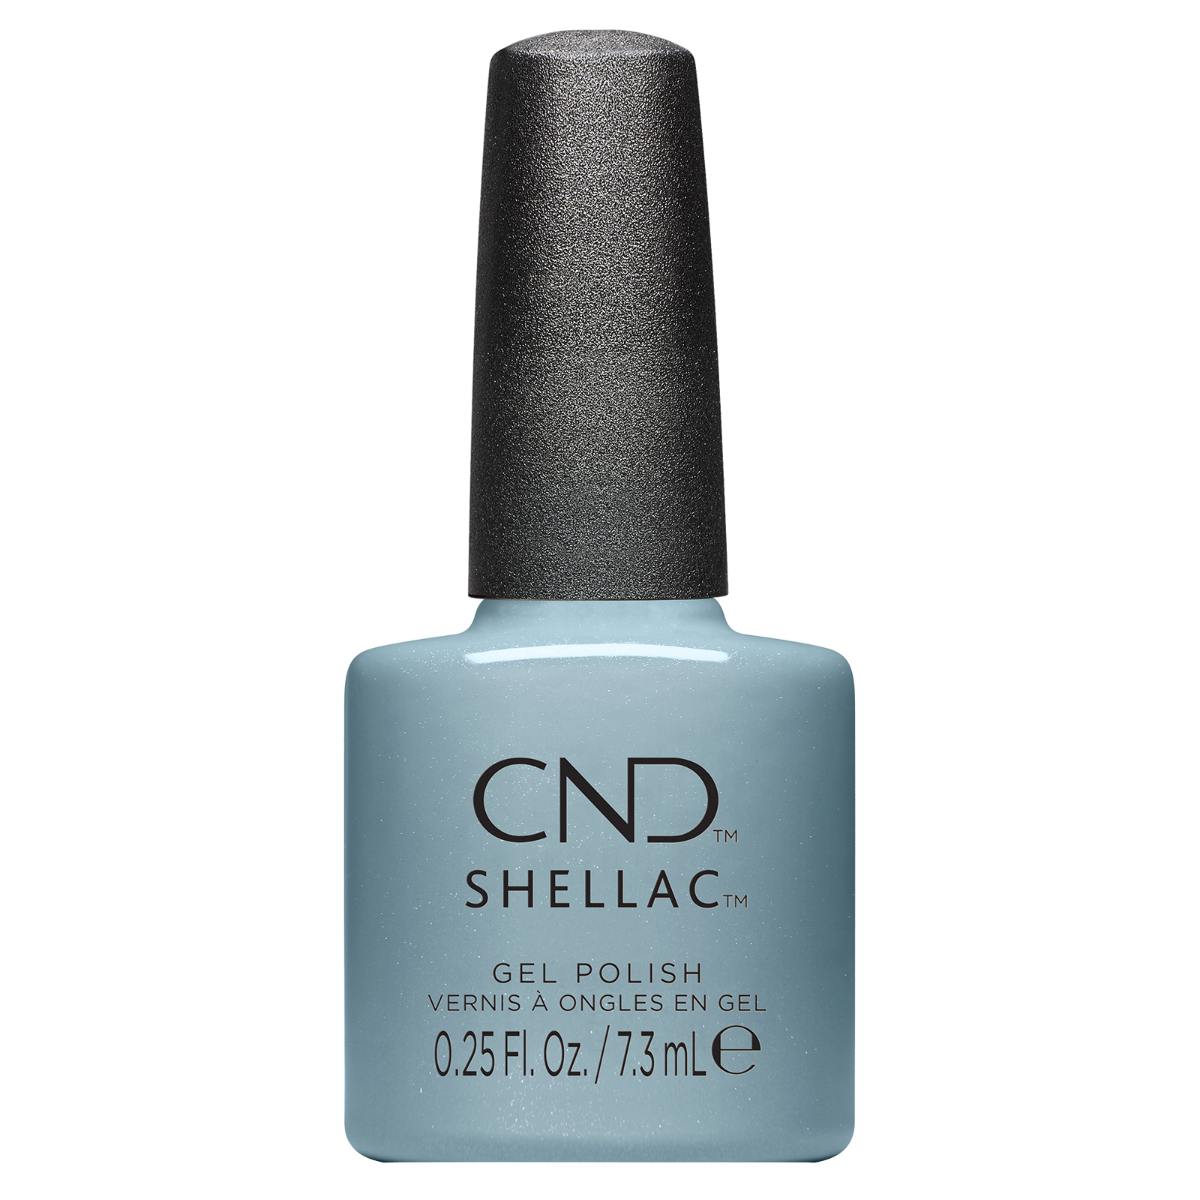 CND Upcycle Chic Collection Shellac - Teal Textile